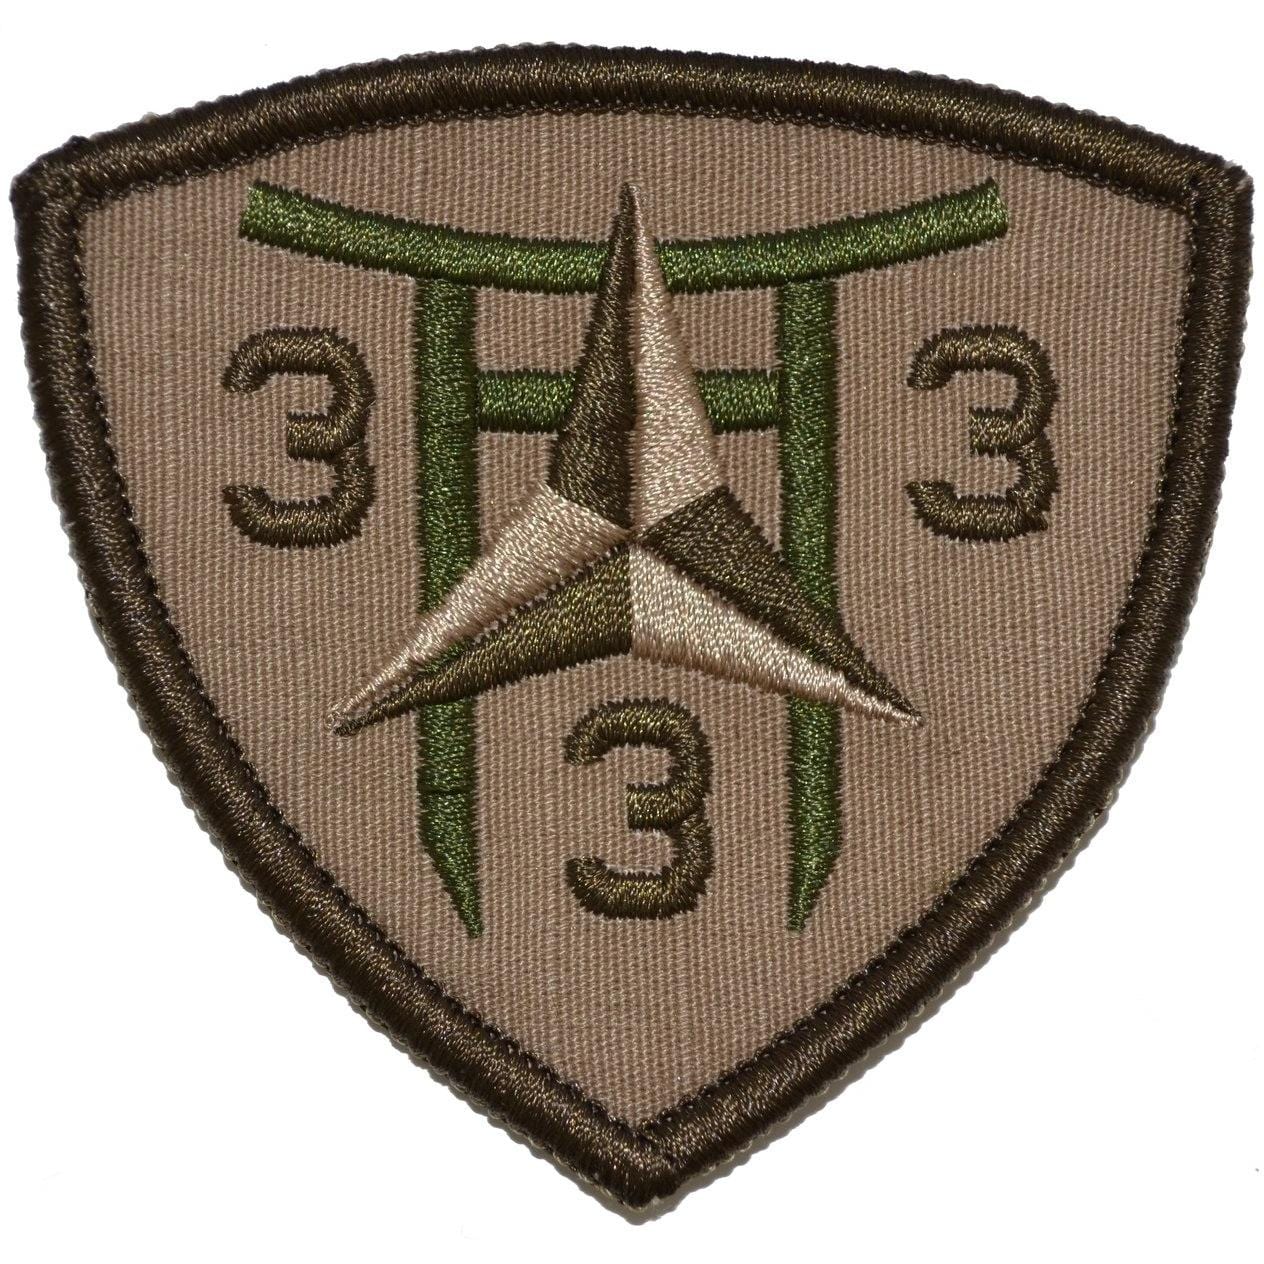 Tactical Gear Junkie Patches Coyote Brown 3rd Battalion 3rd Marine Regiment Shield Patch